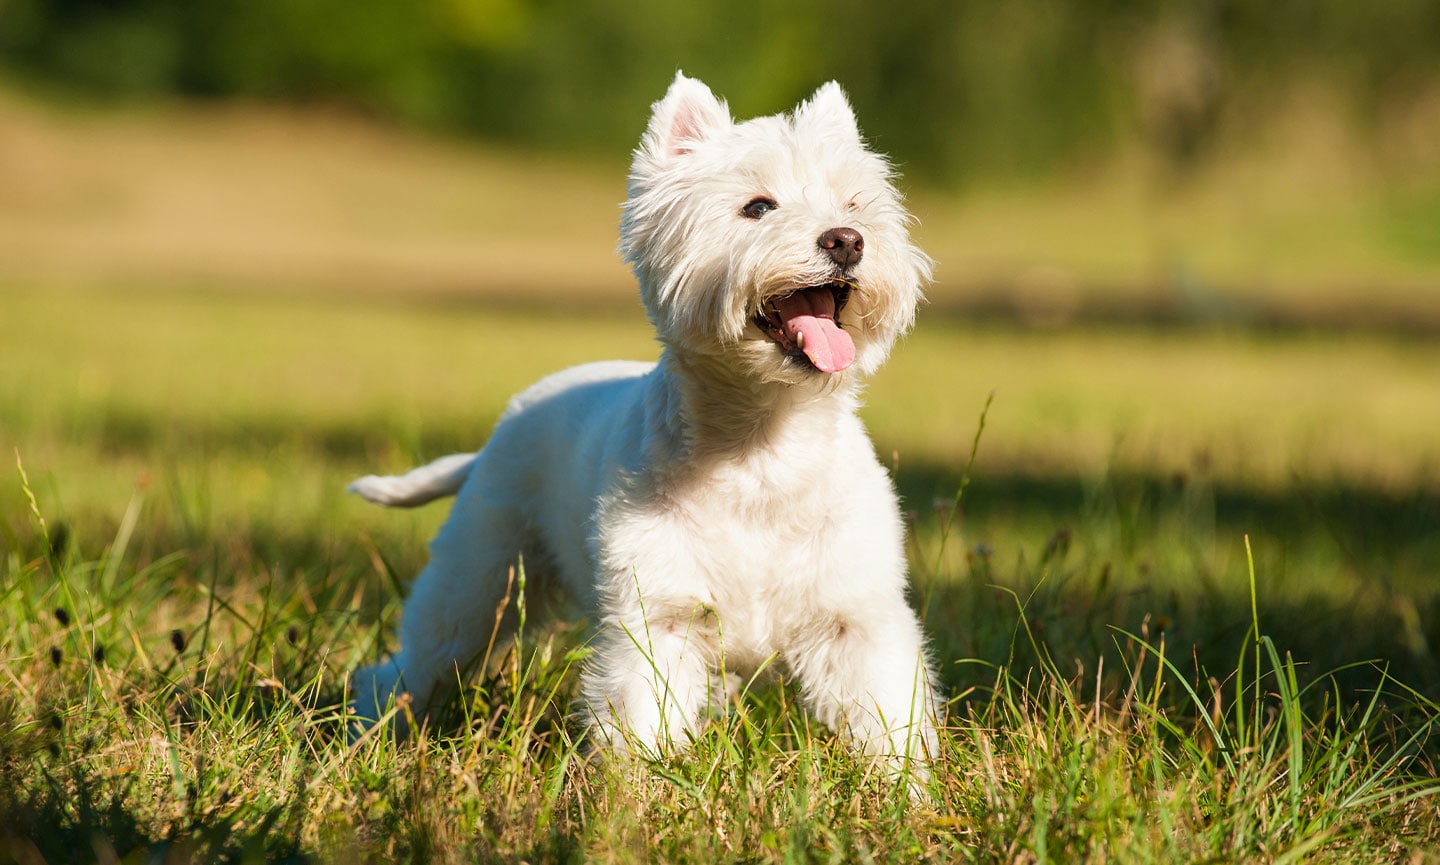 How Much For A West Highland White Terrier